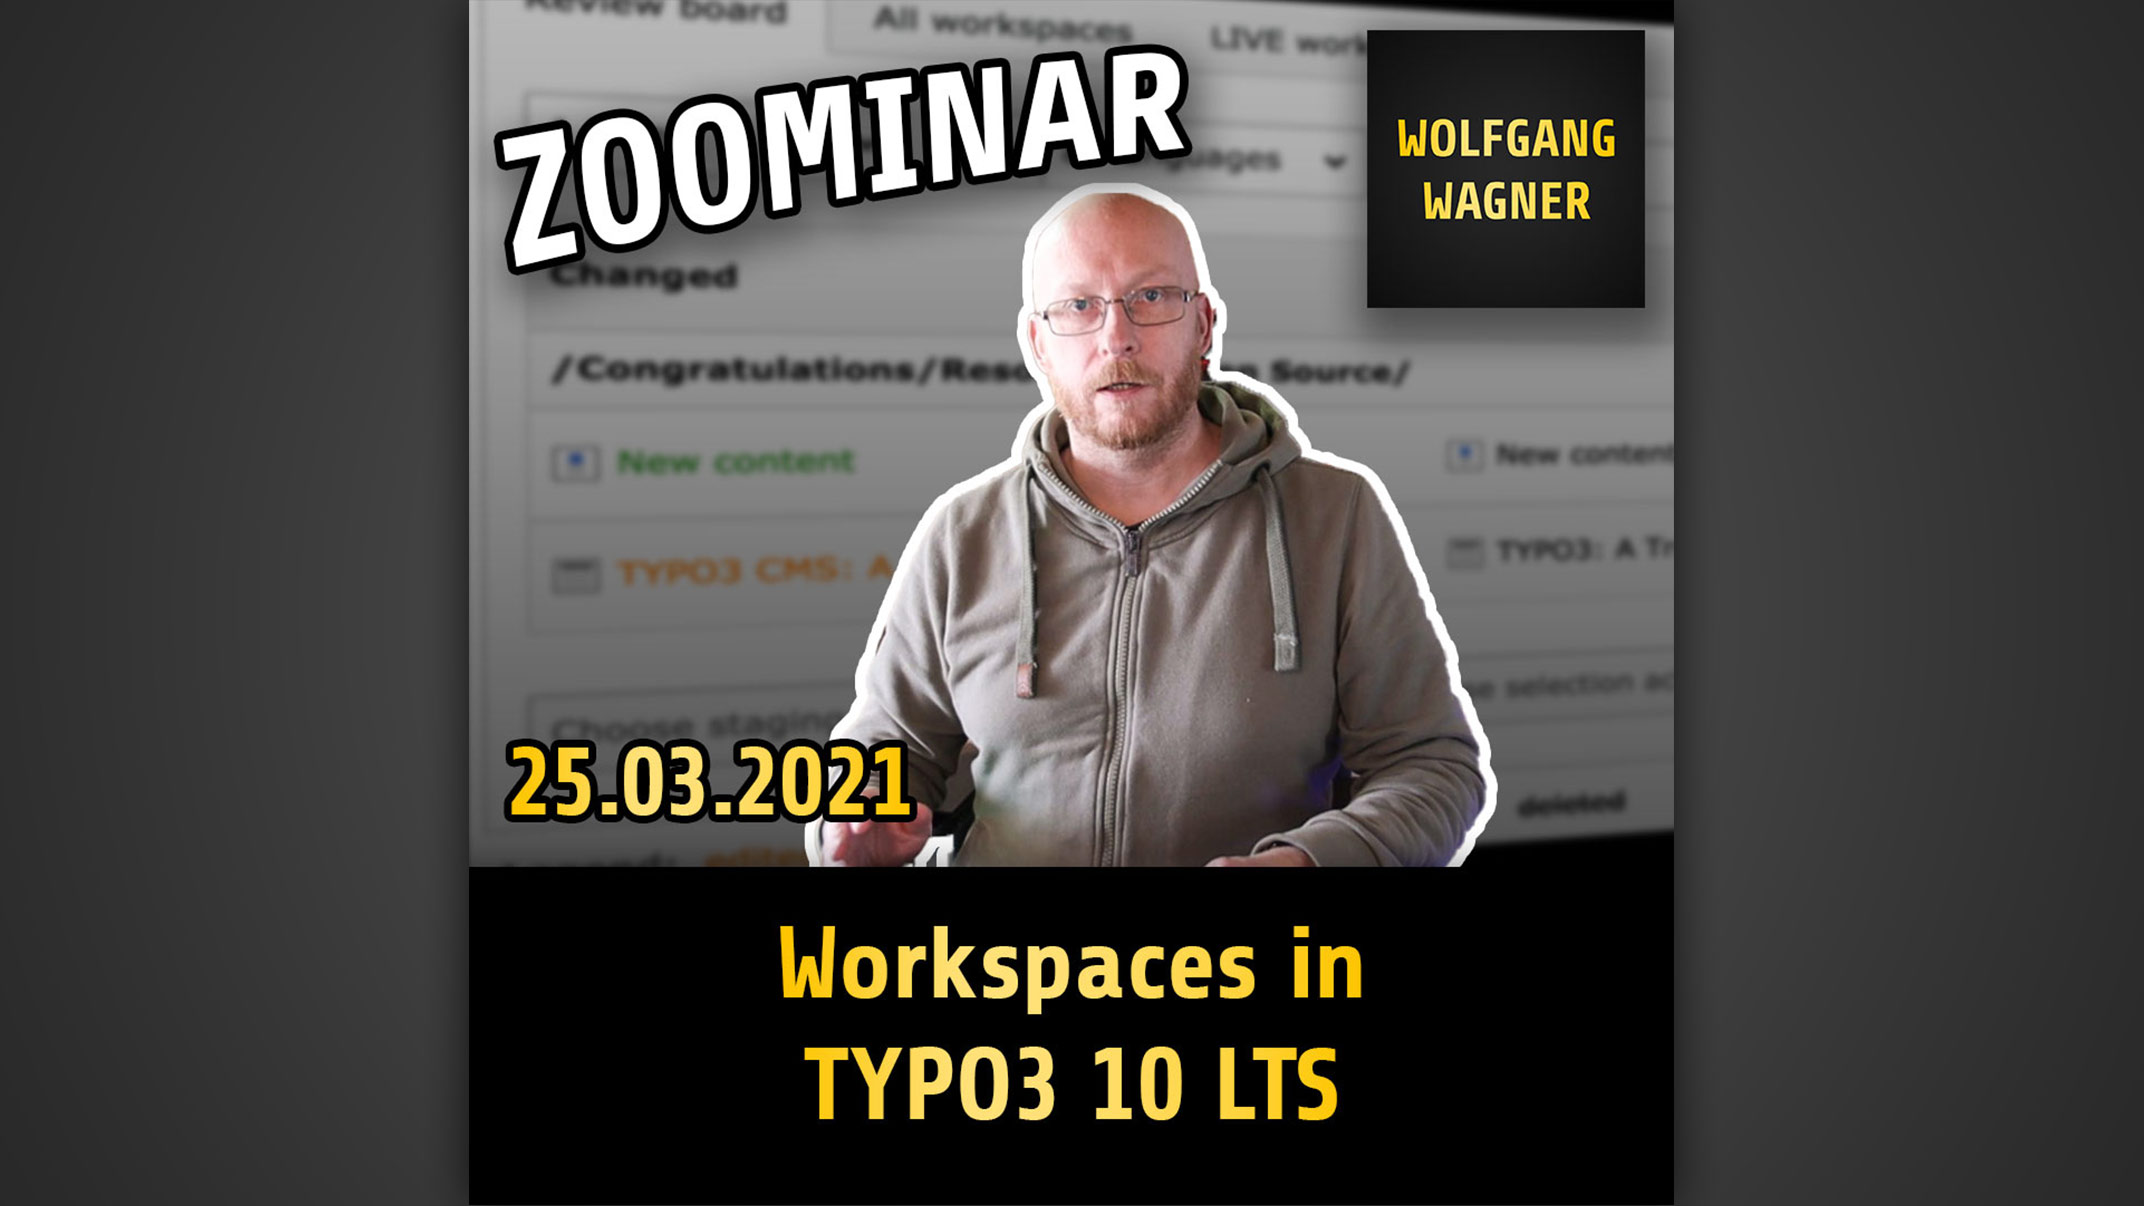 You are currently viewing Zoominar “Workspaces in TYPO3 10 LTS”